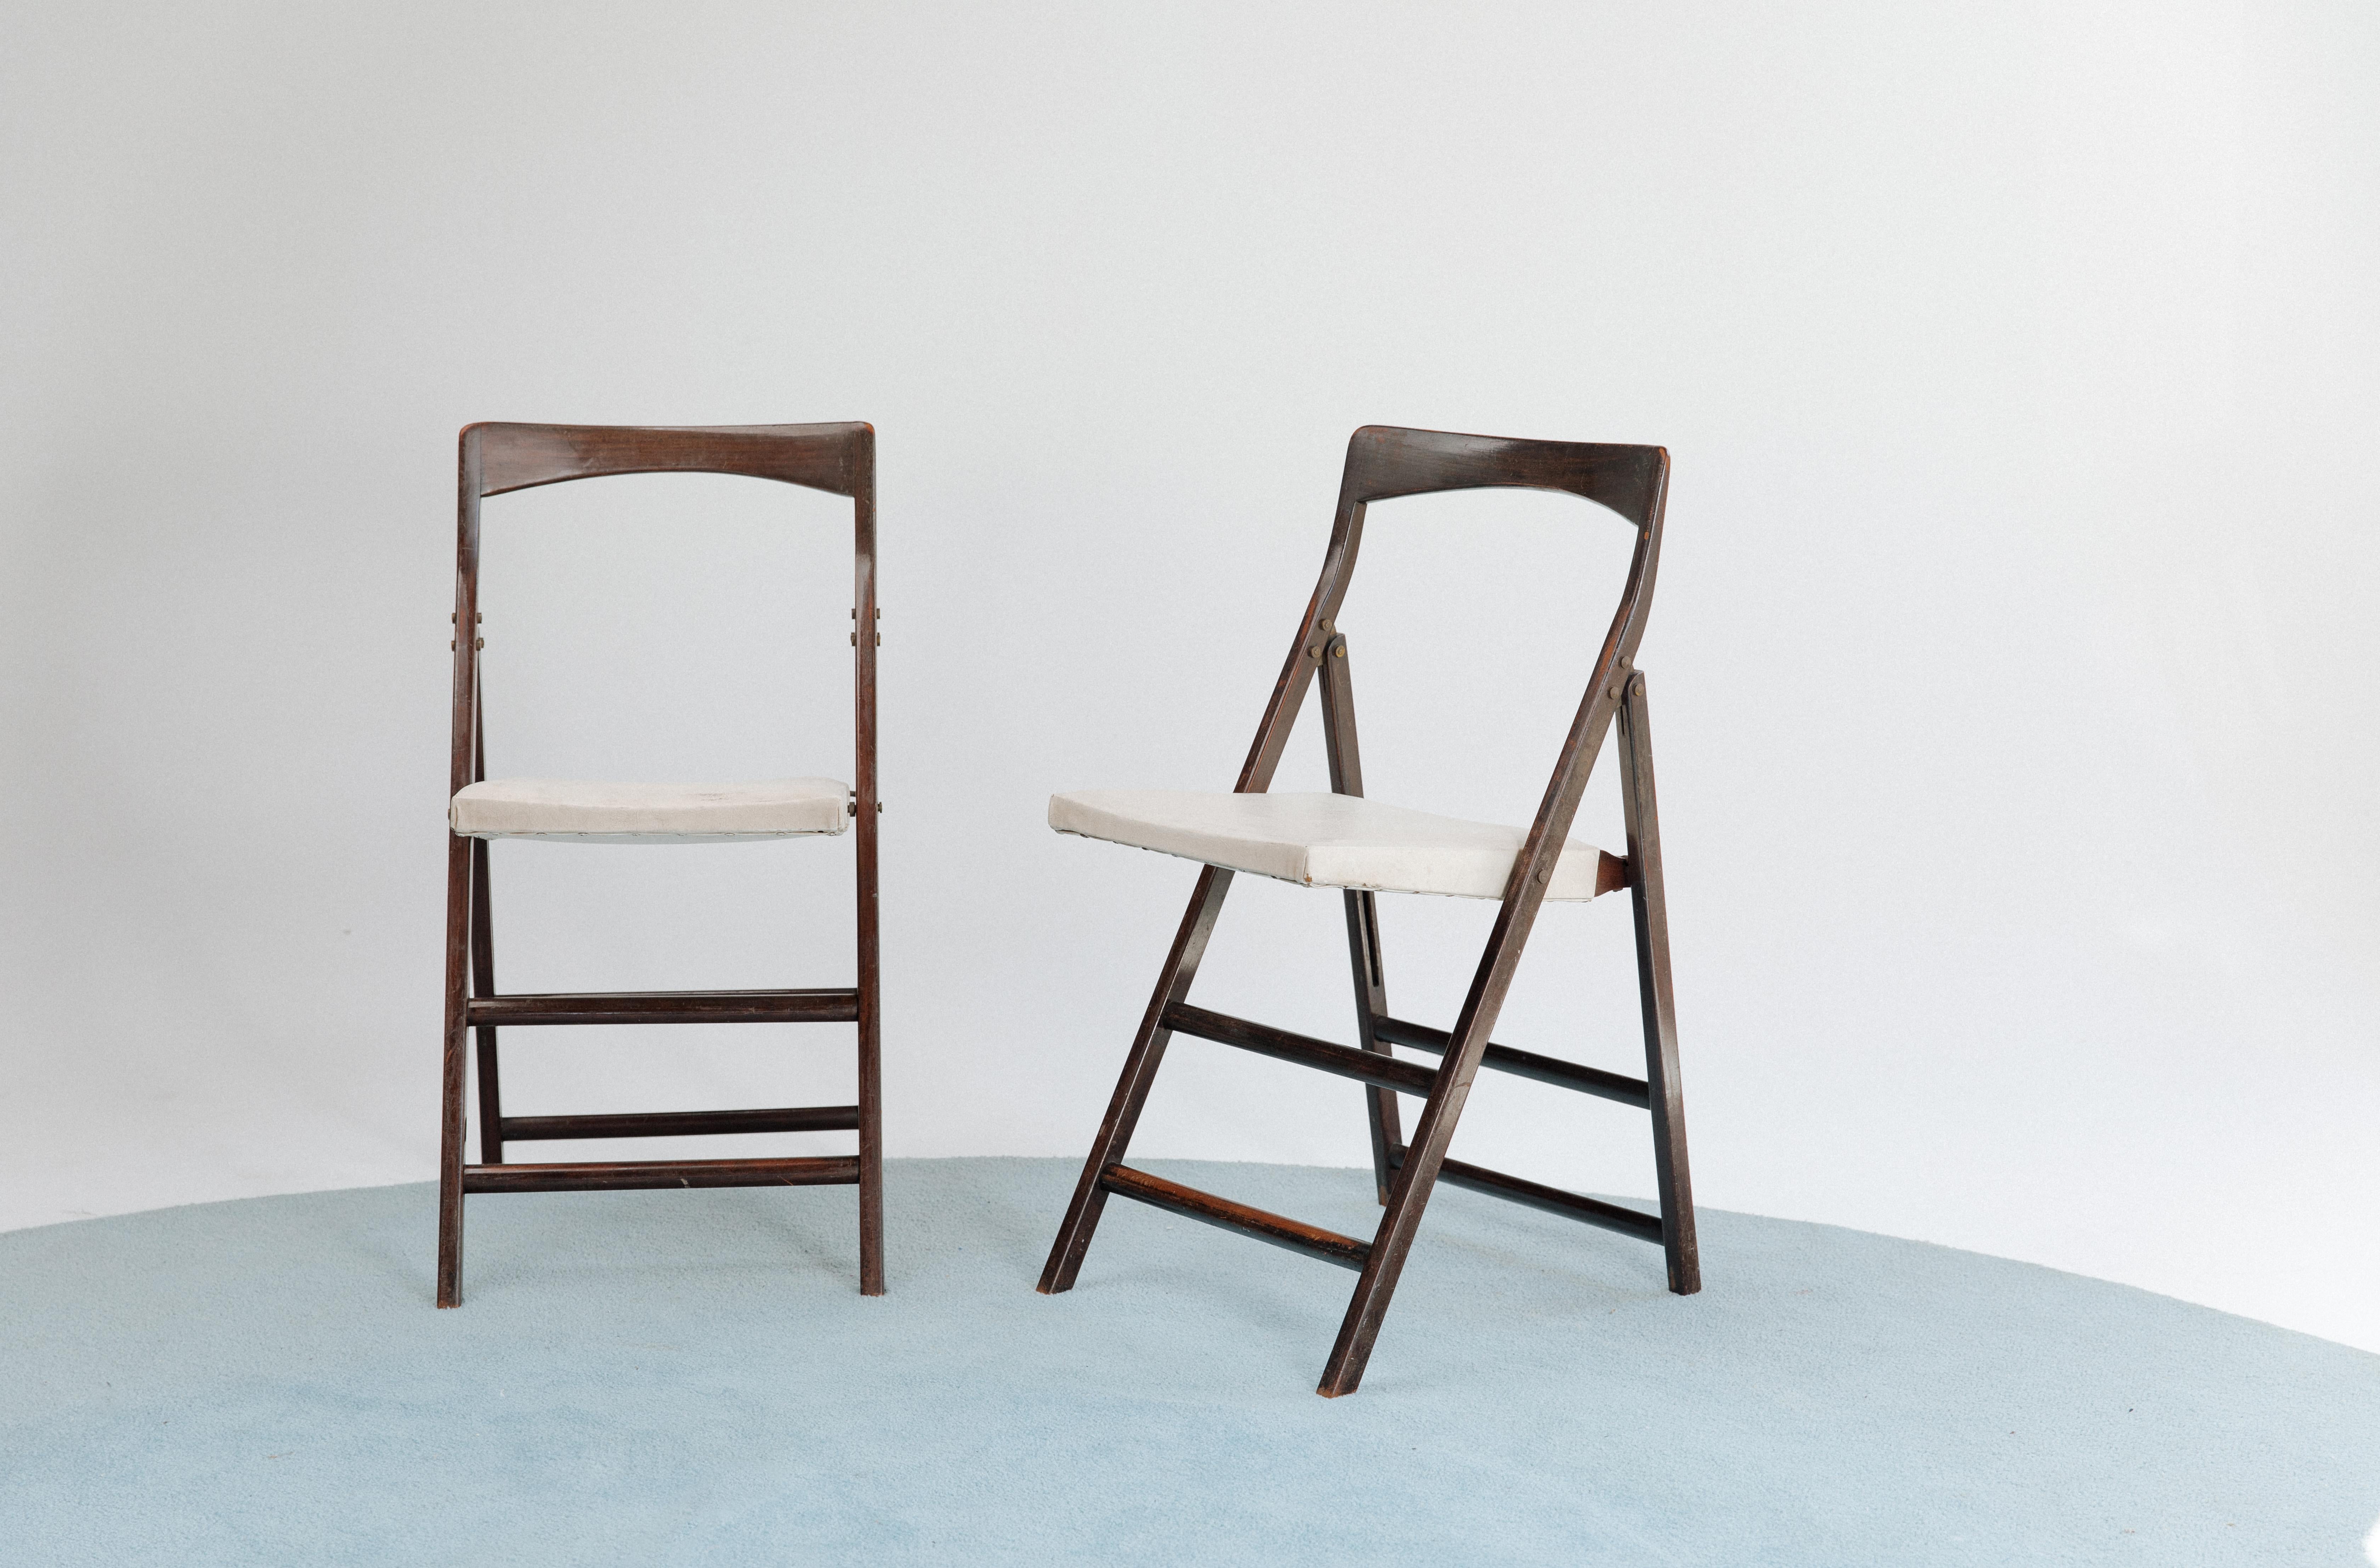 Elegant folding chair by Osvaldo Borsani, 1949. The S80 chairs are the most elegant folding chairs of its kind. 

Made of solid wood with bronze details and vintage white leather seat. These chairs has been produced in Brazil by Ambiente in the